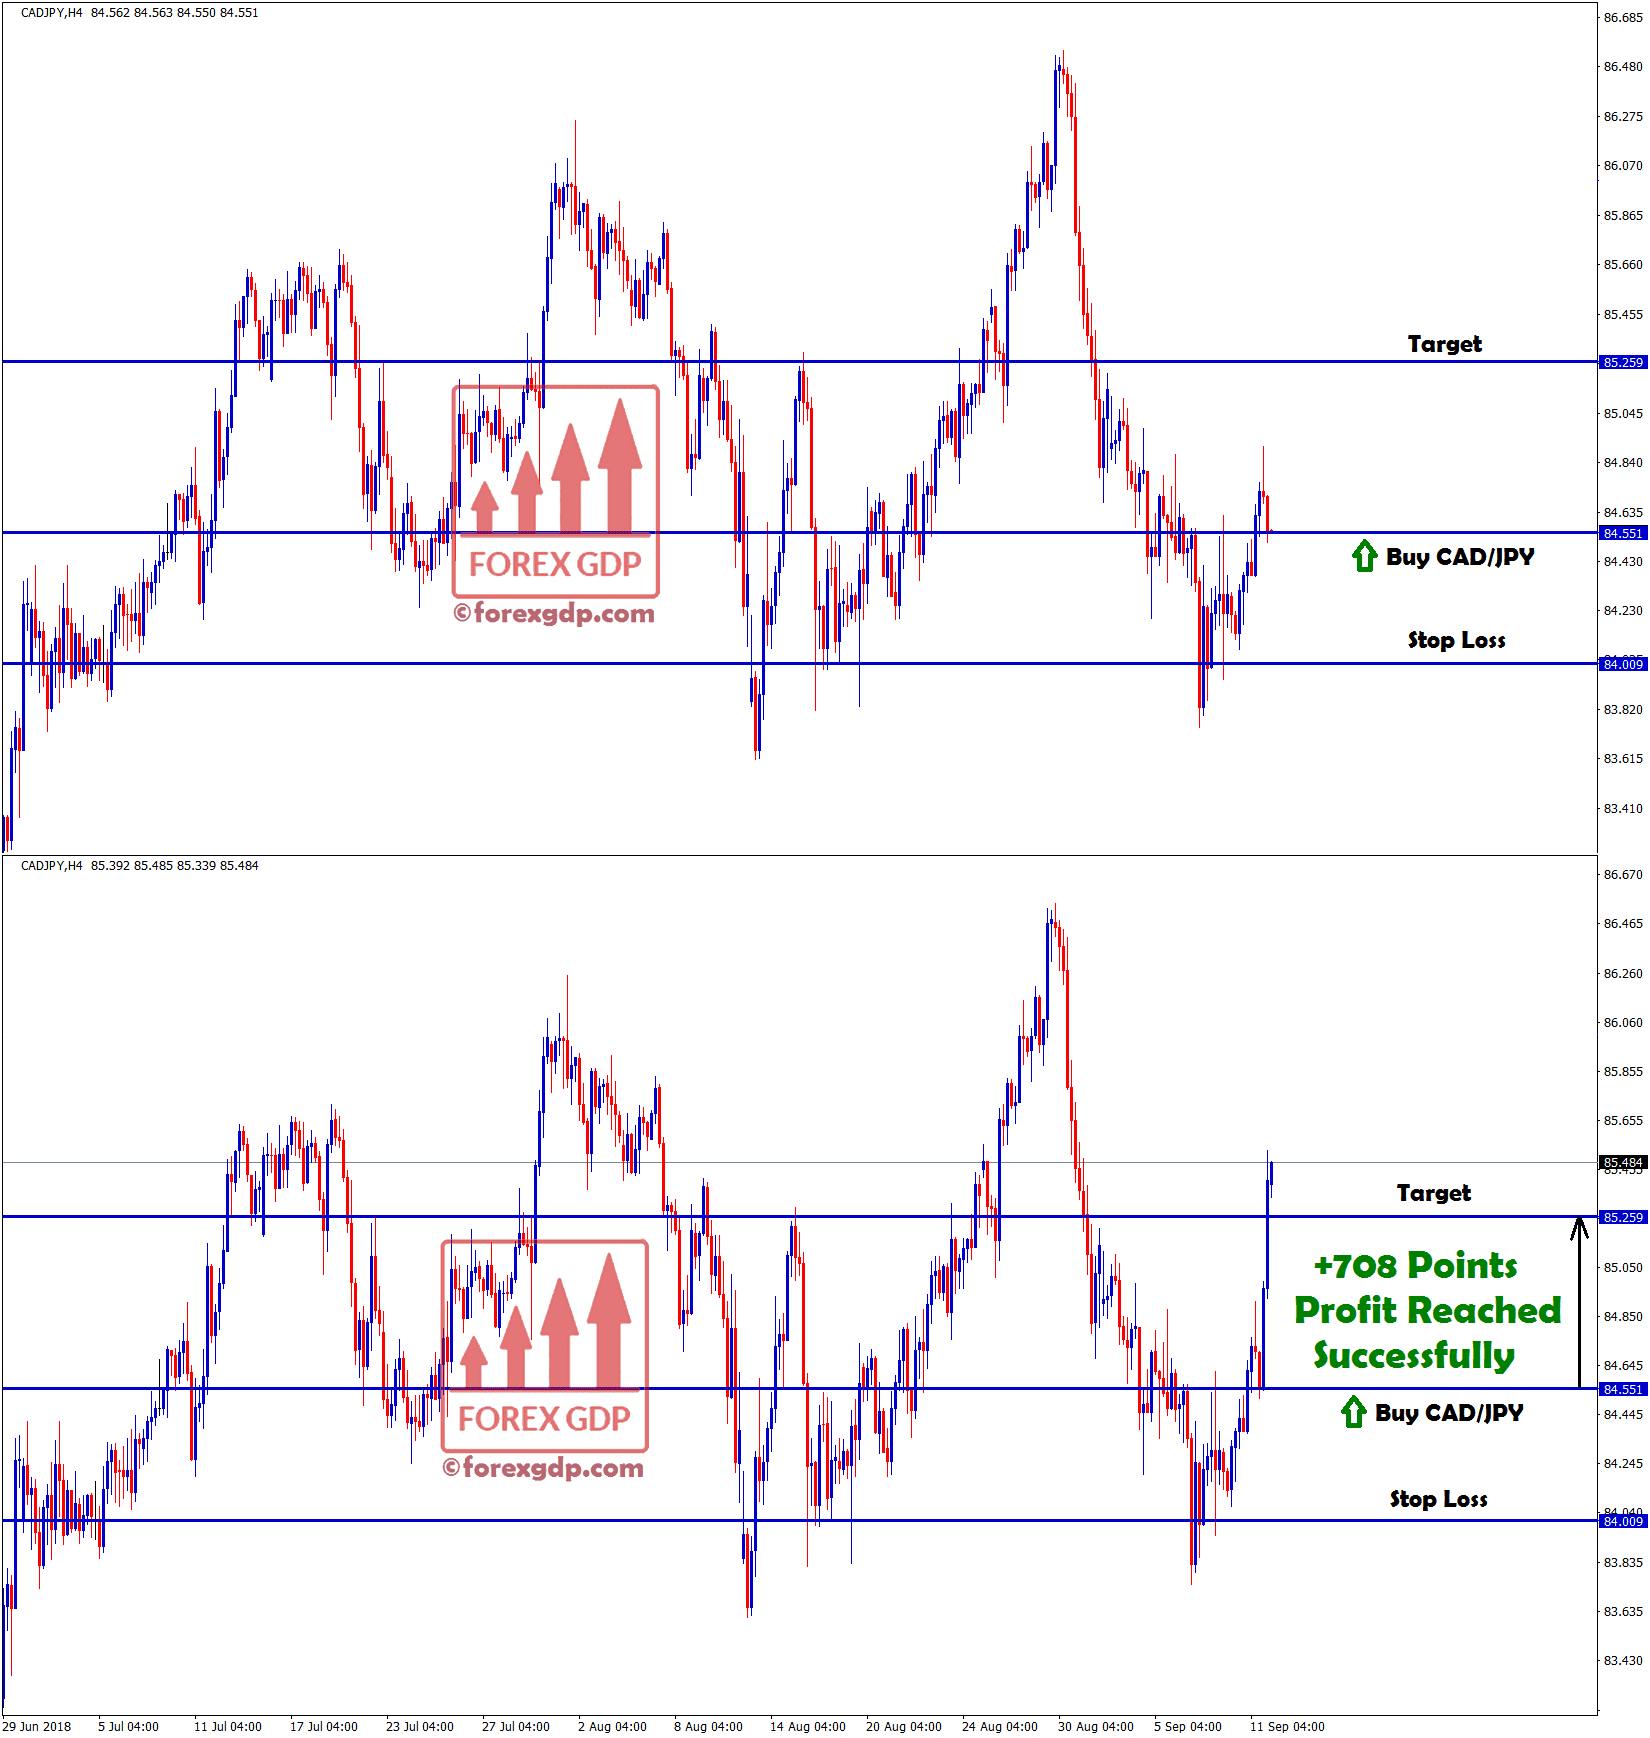 Take profit touched in CAD JPY buy signal